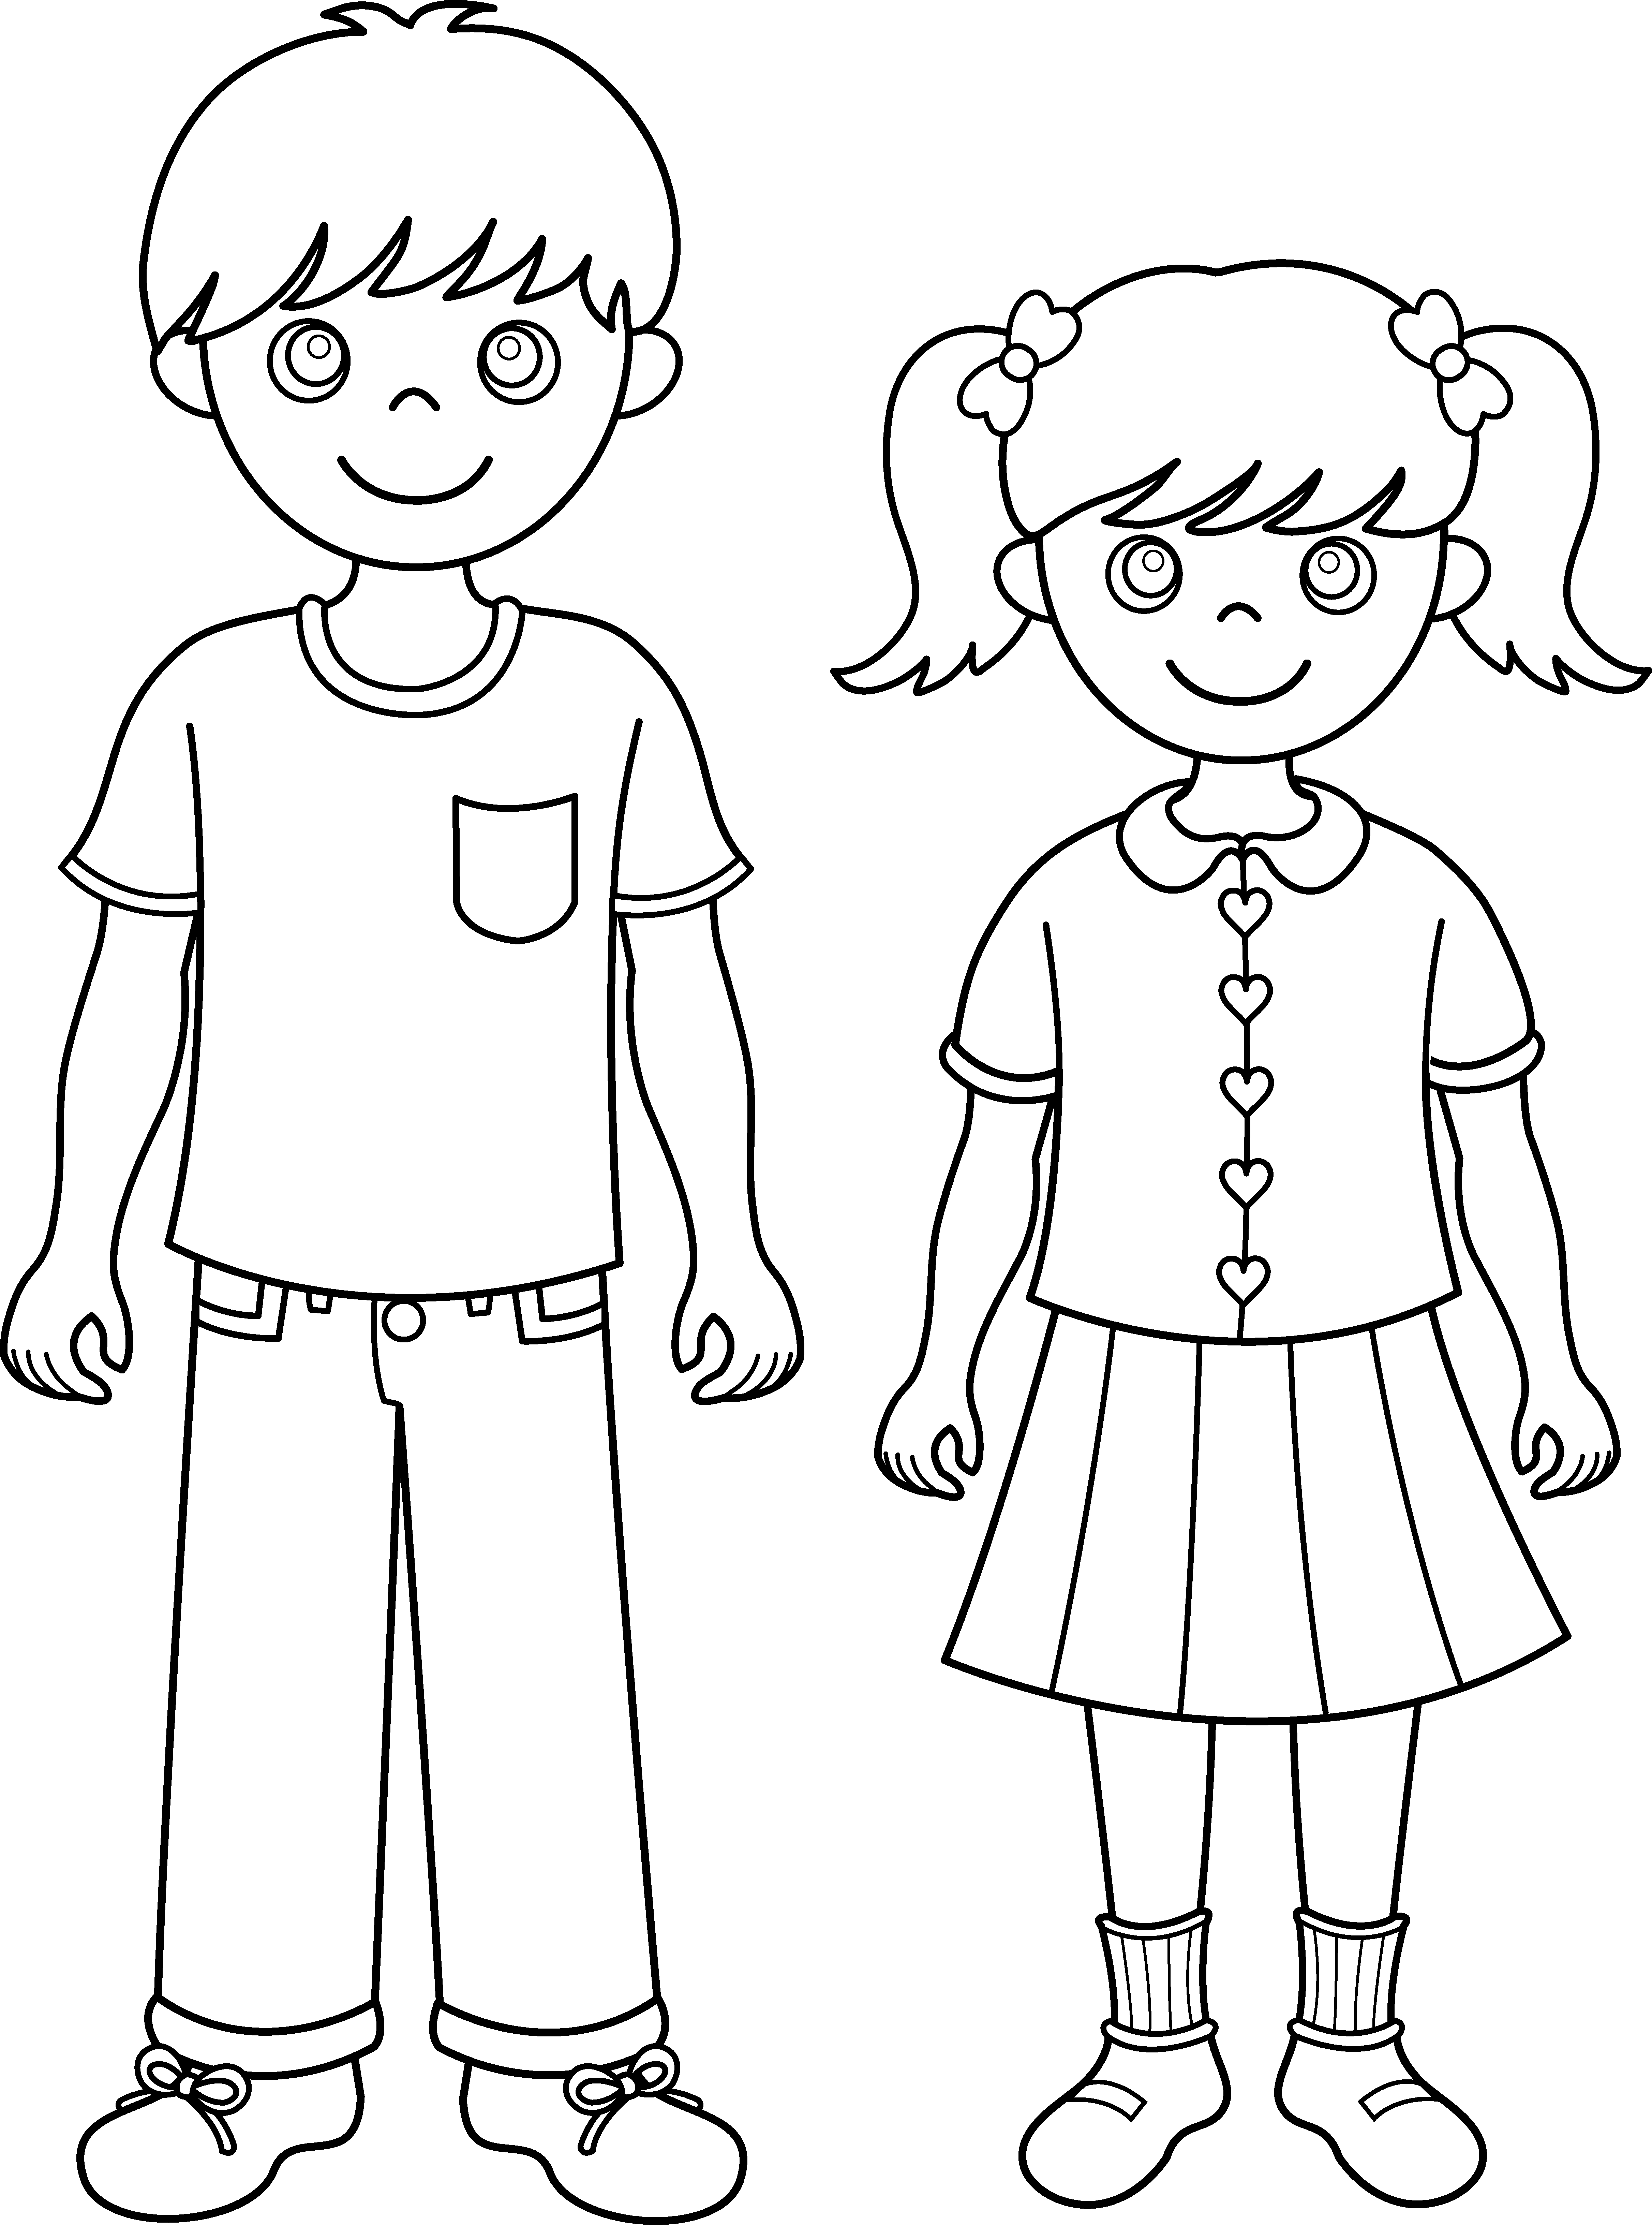 sister and brother clipart black and white
